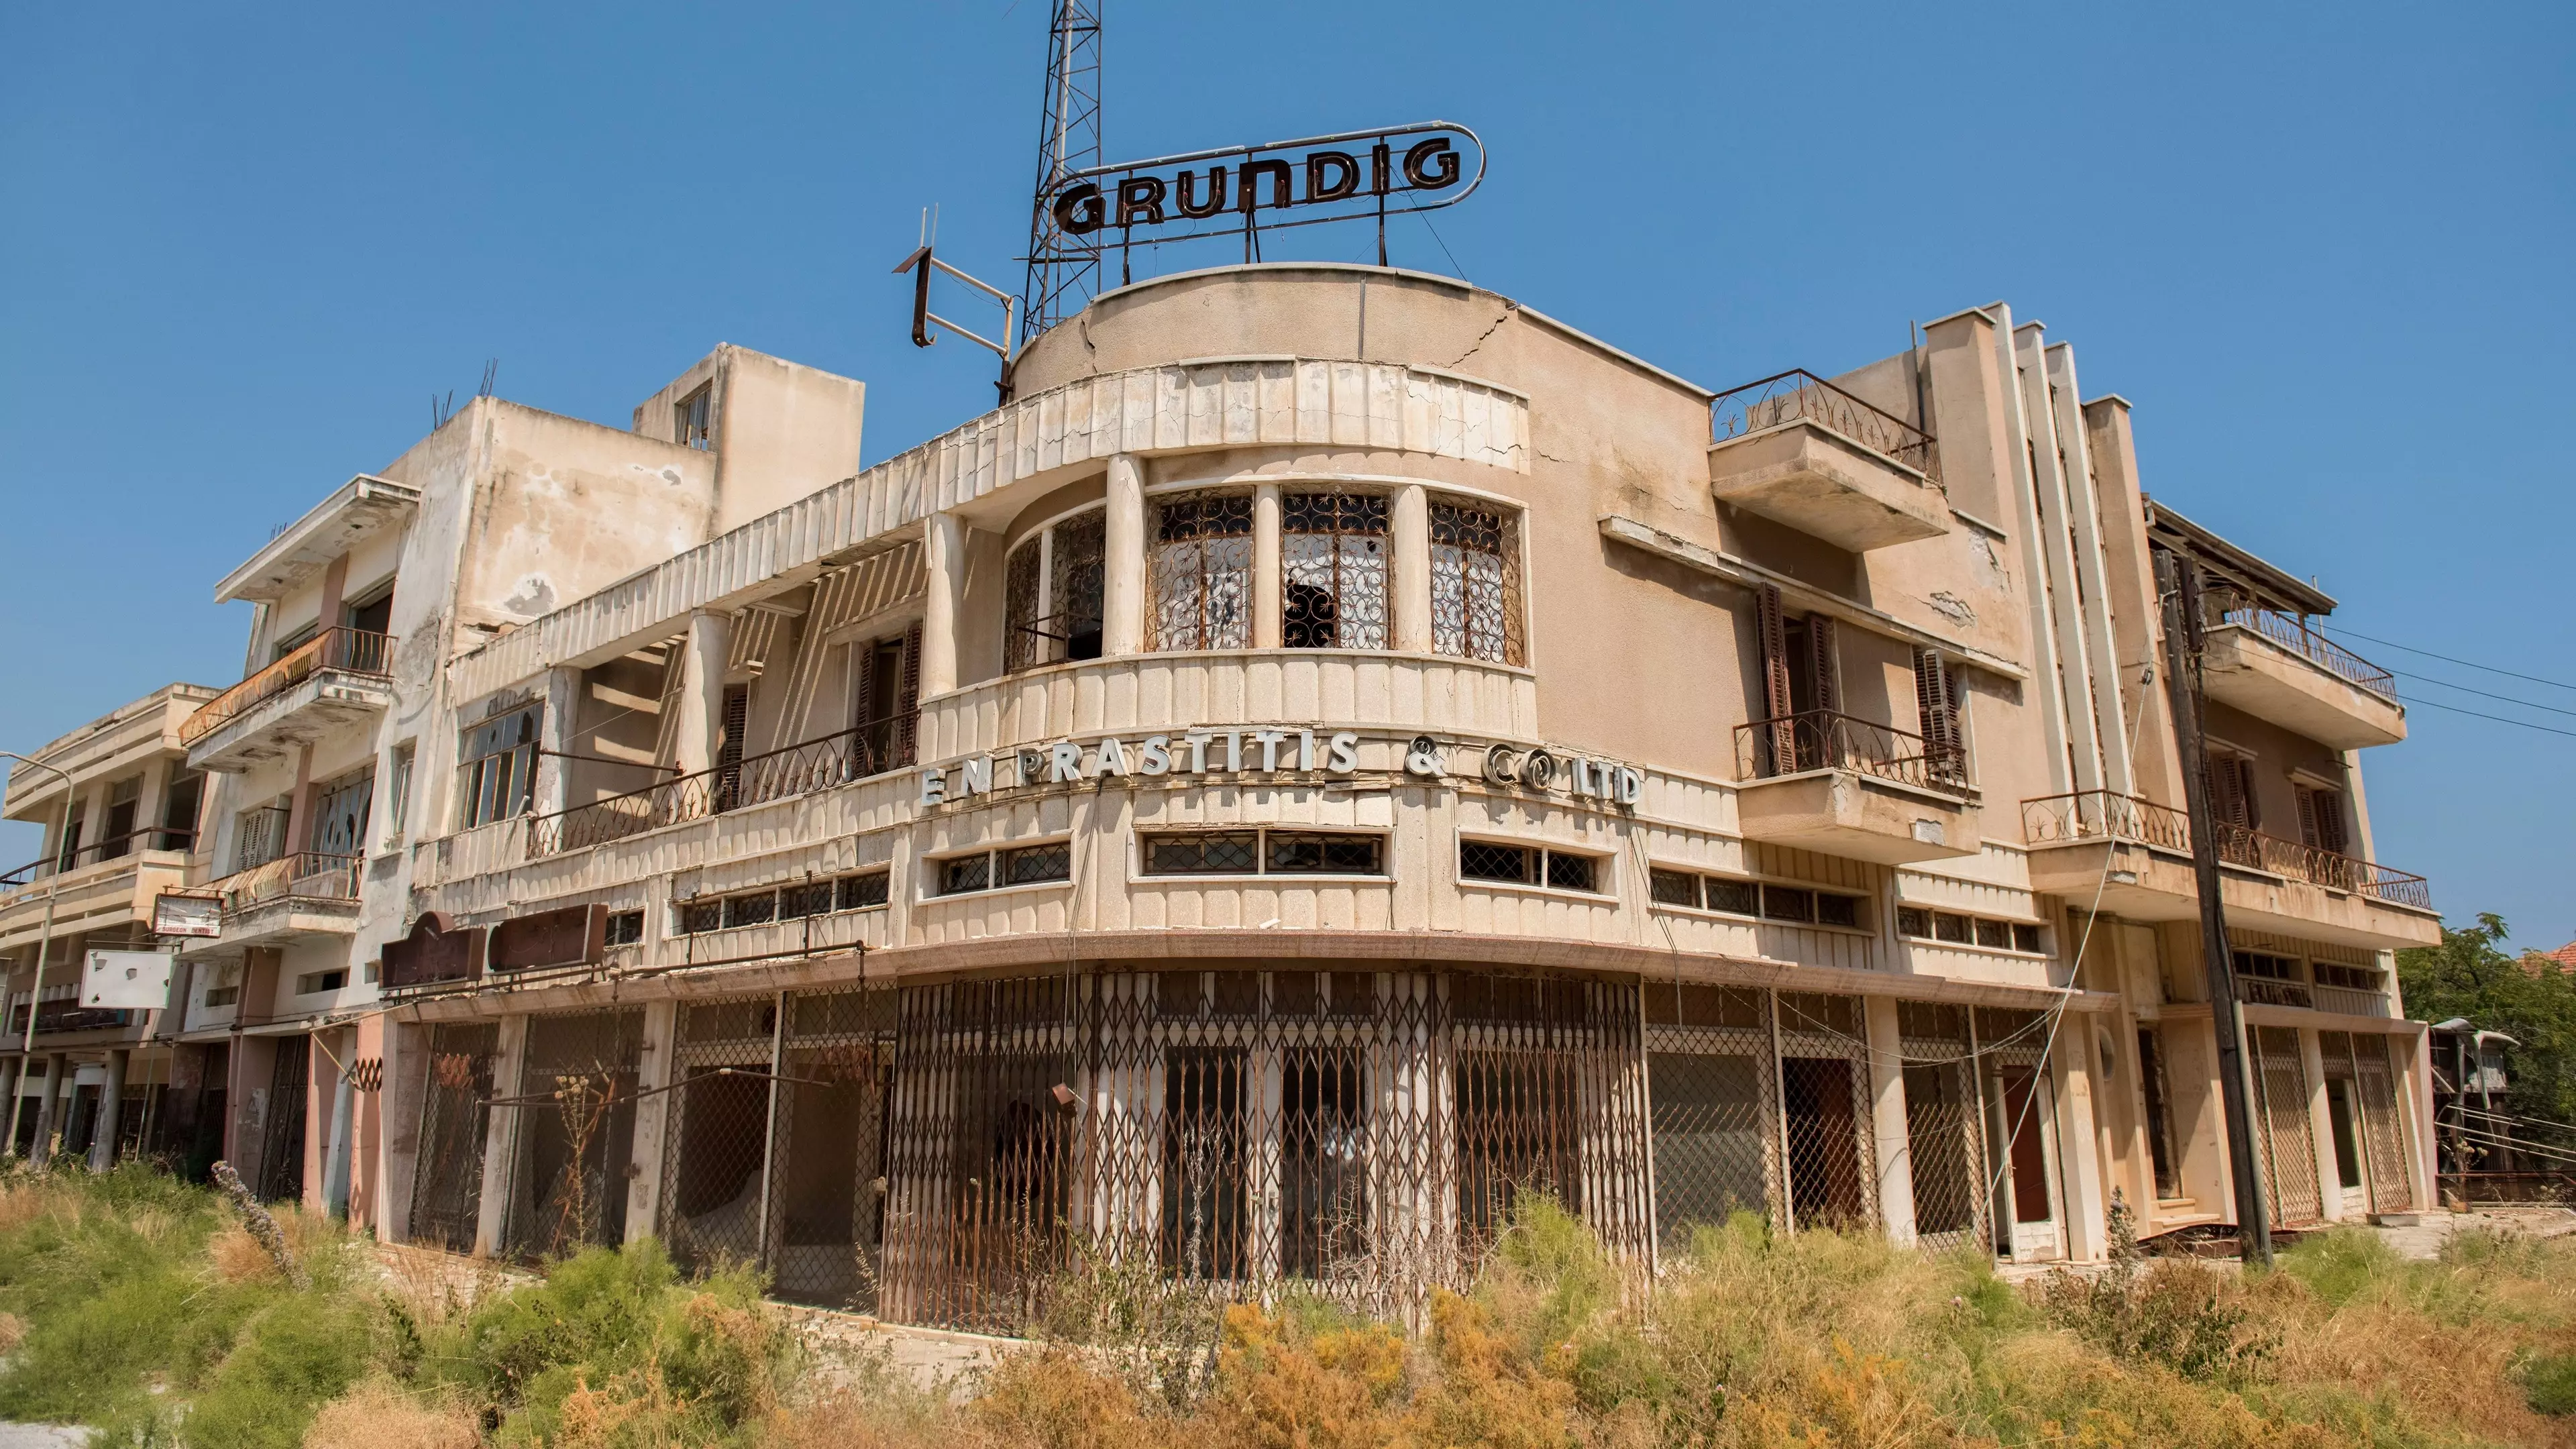 Controversial Plans To Reopen Abandoned 'Millionaire's Playground' Resort In Northern Cyprus 